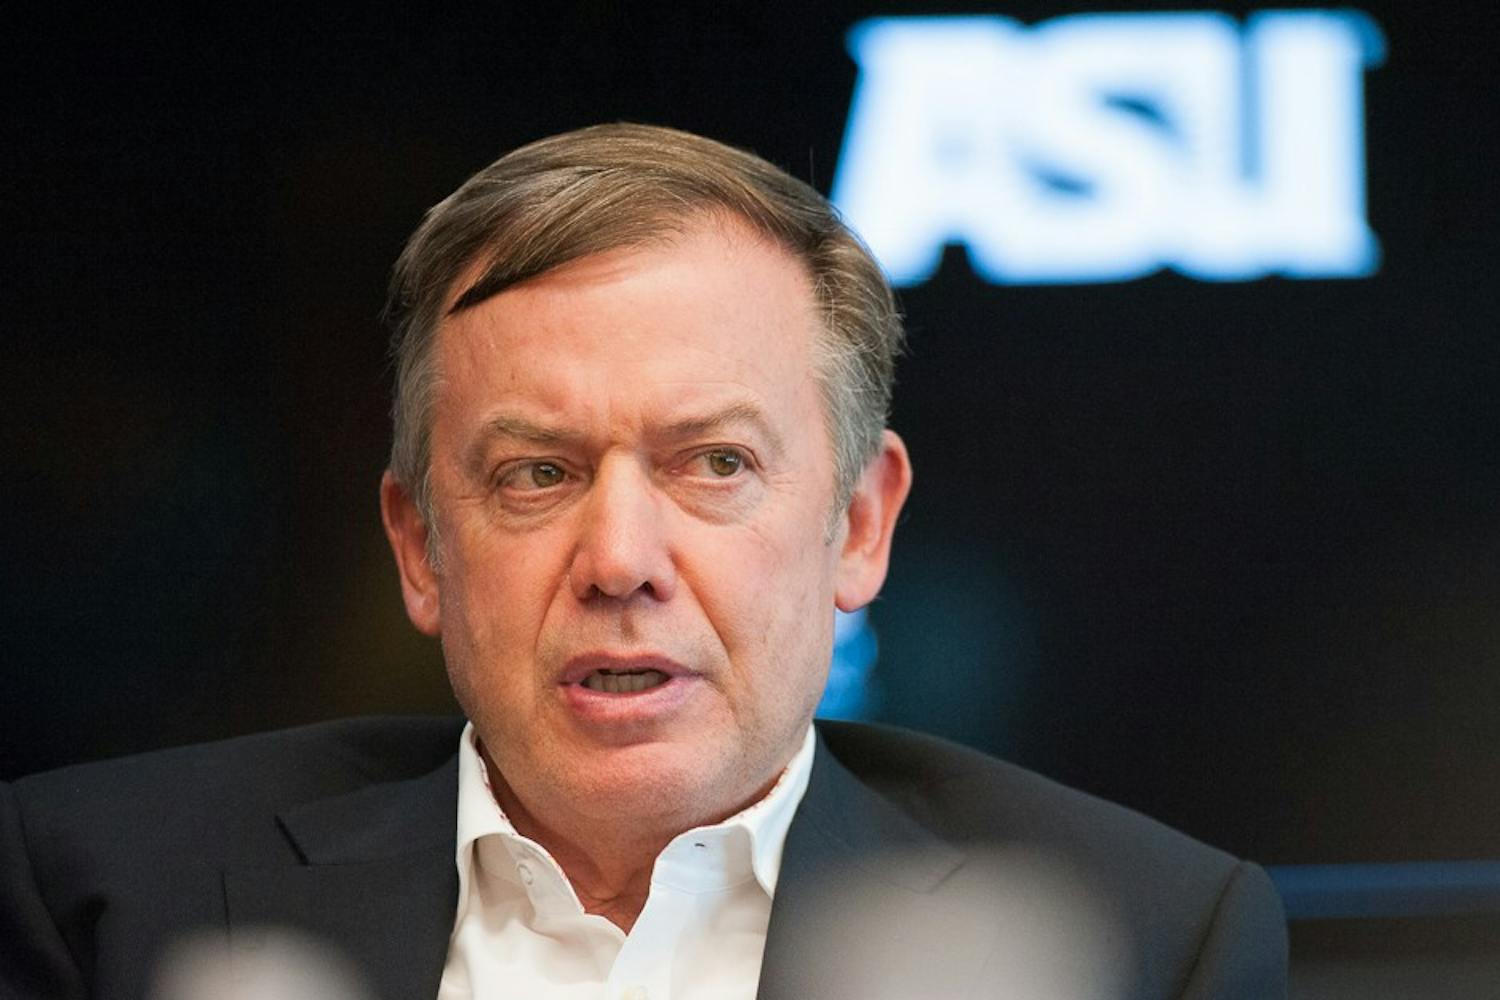 President Michael Crow meets with The State Press editorial board on Friday, Oct. 2, 2015, at the Fulton Center in Tempe.